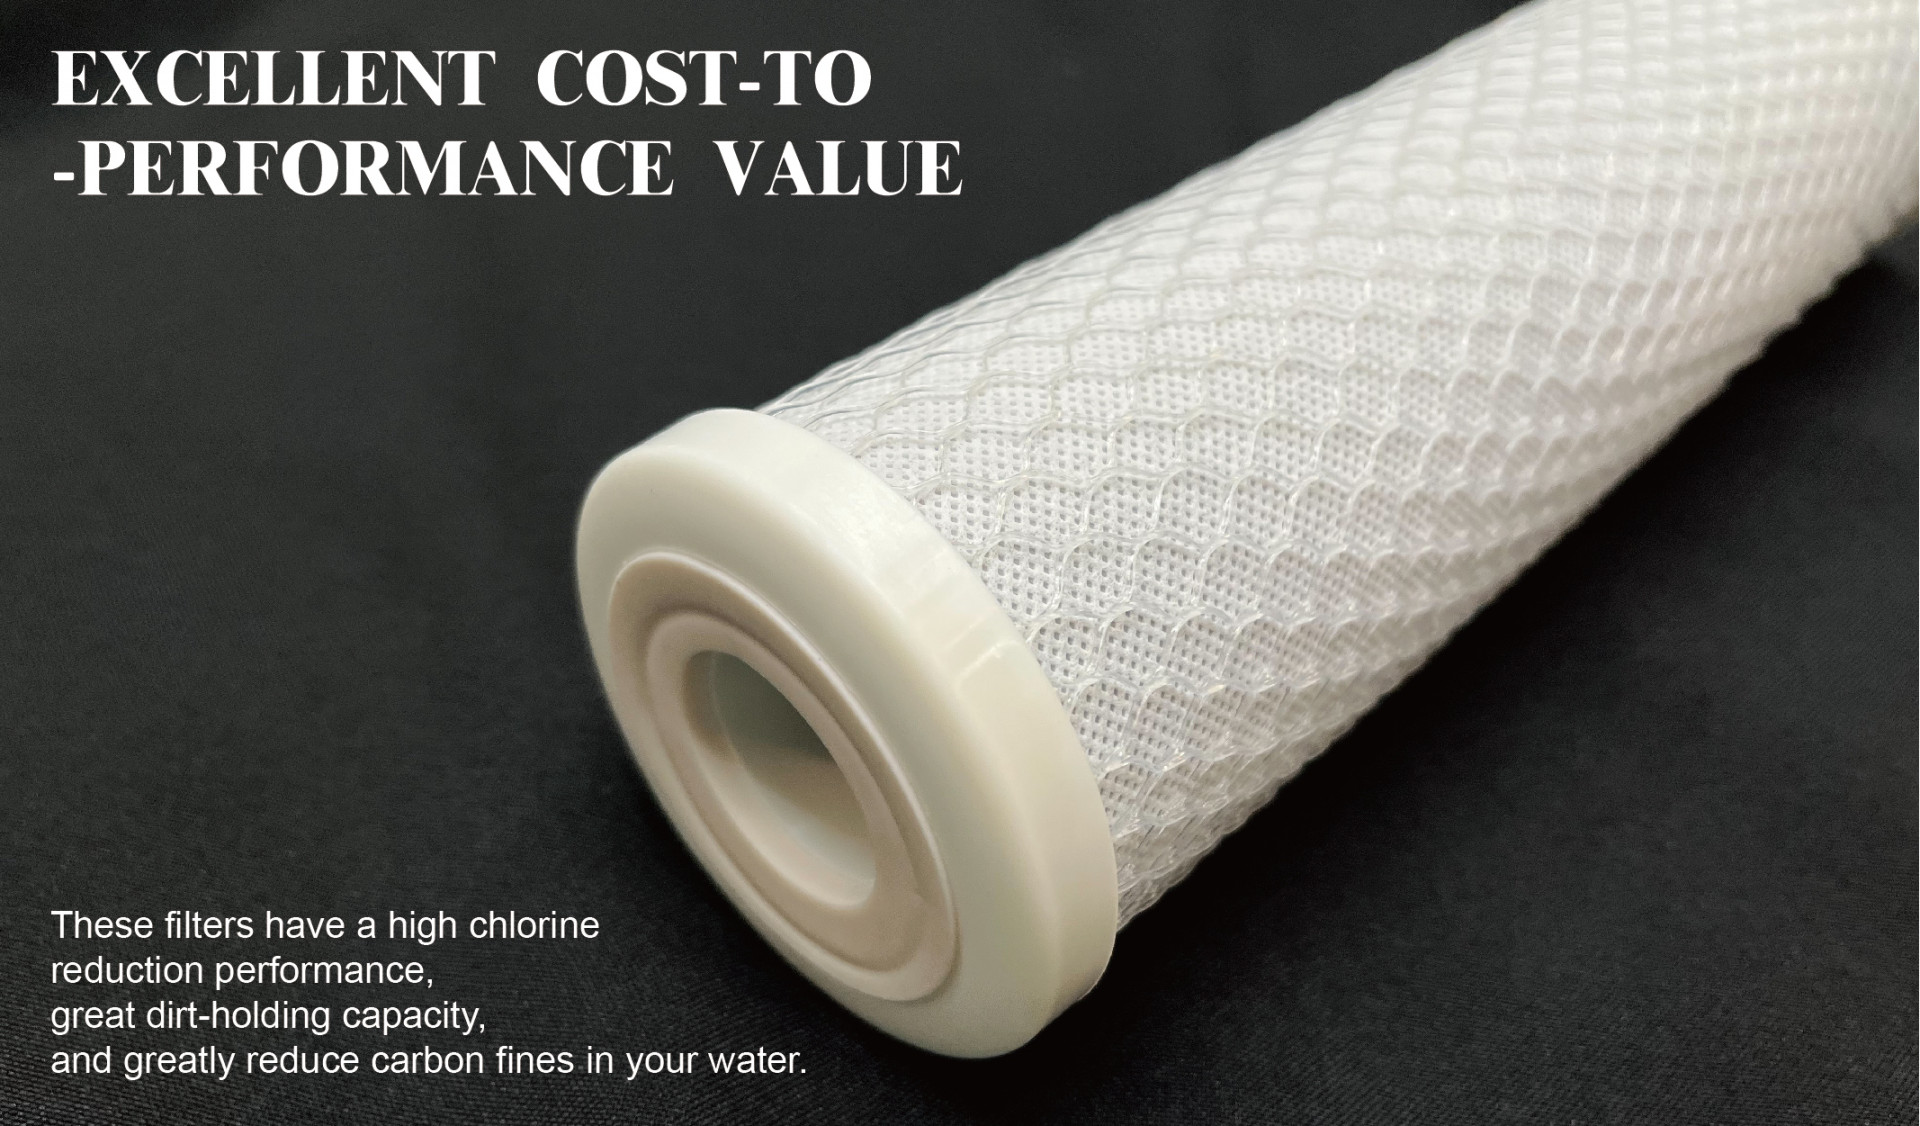 FILTER EXCELLENT COST-TO-PERFORMANCE VALUE